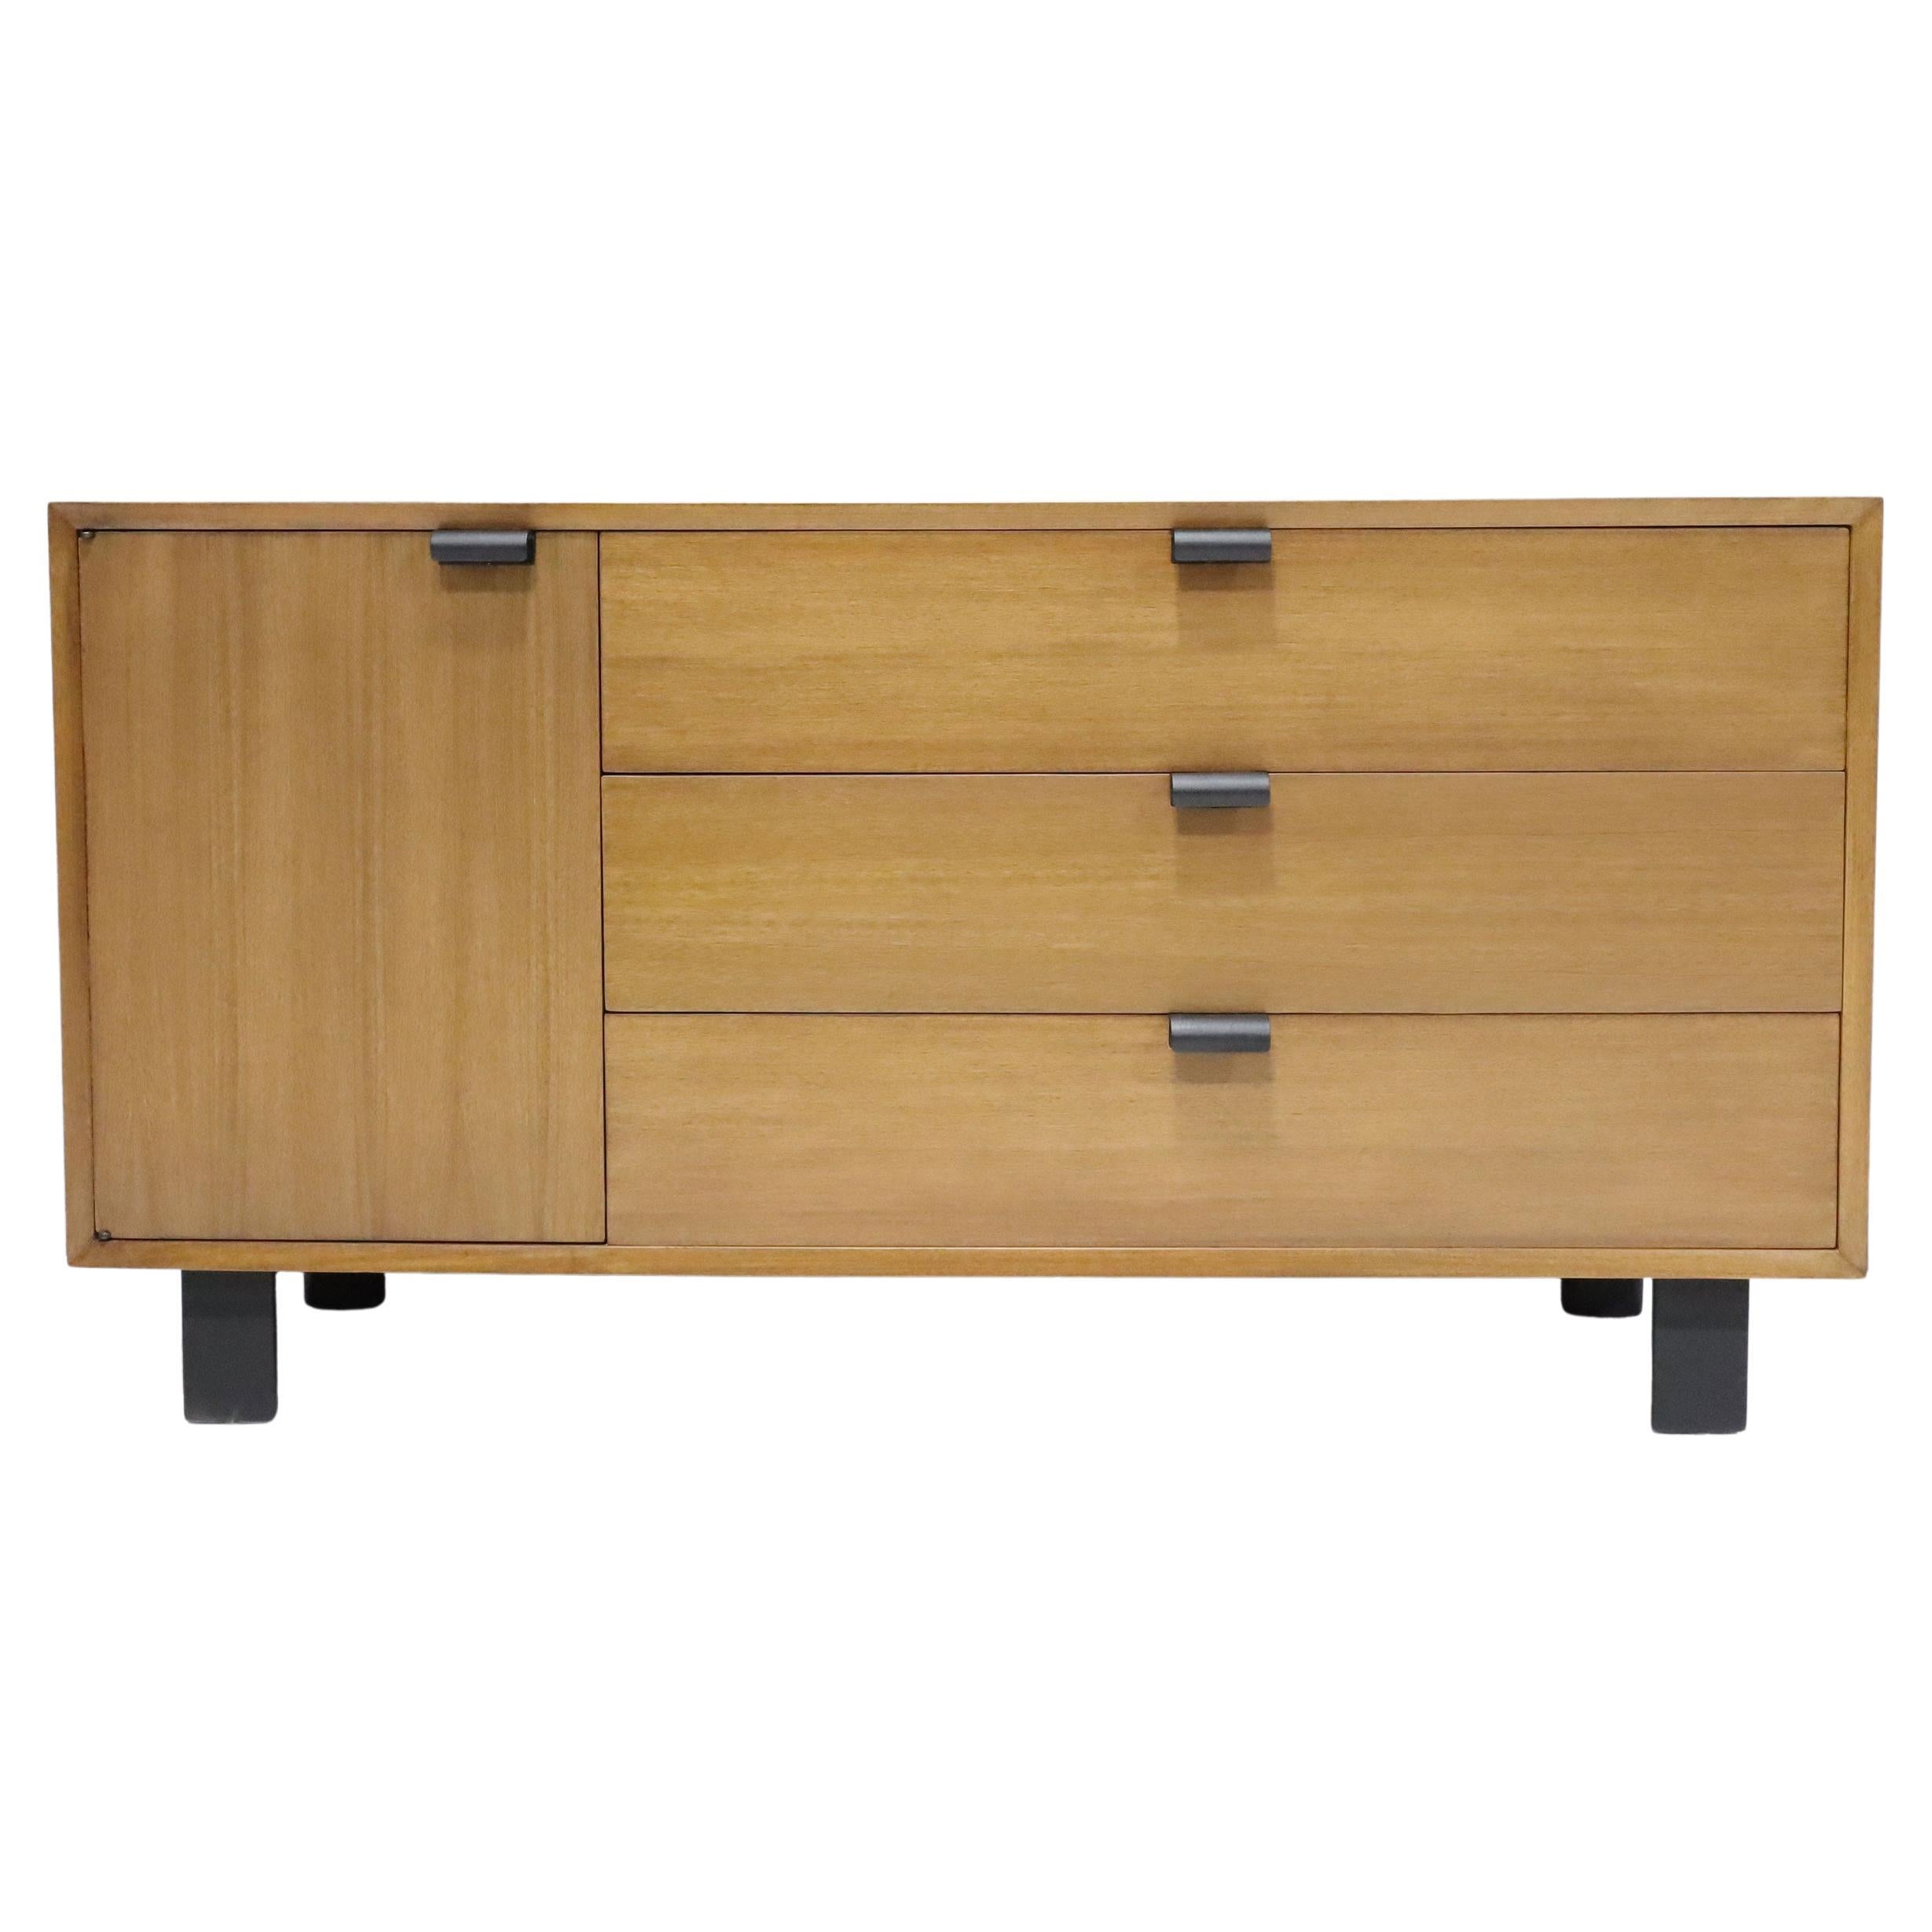 George Nelson for Herman Miller Chest in Walnut with Shelving For Sale